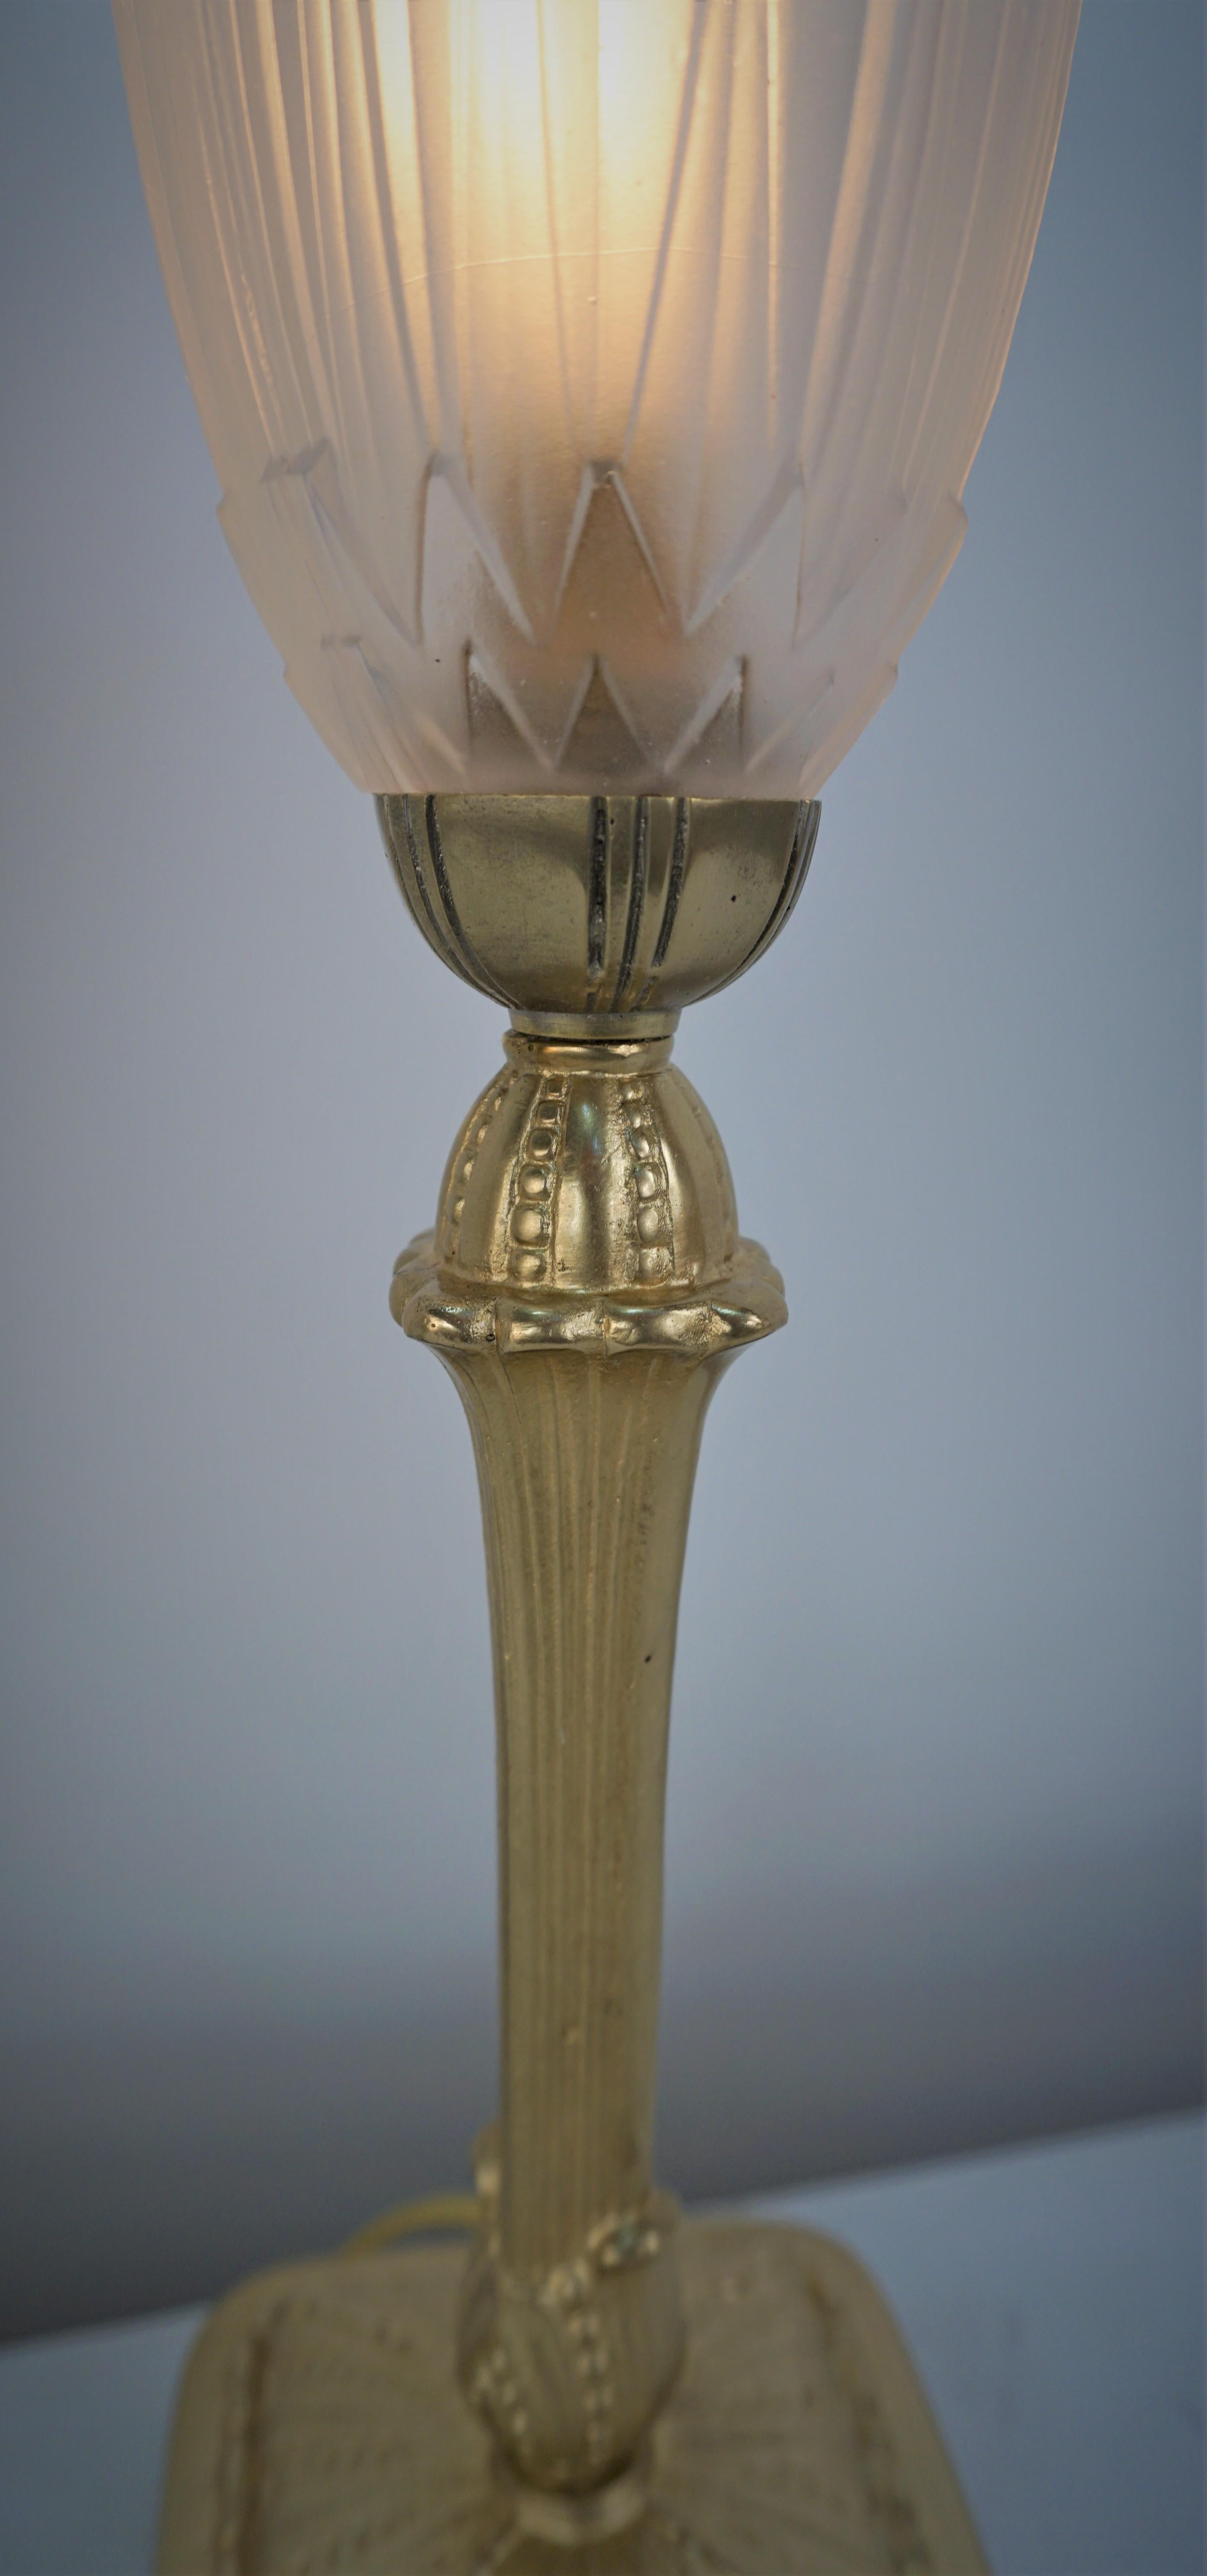 Gills French 1930s Art Deco Table Lamp In Good Condition For Sale In Fairfax, VA